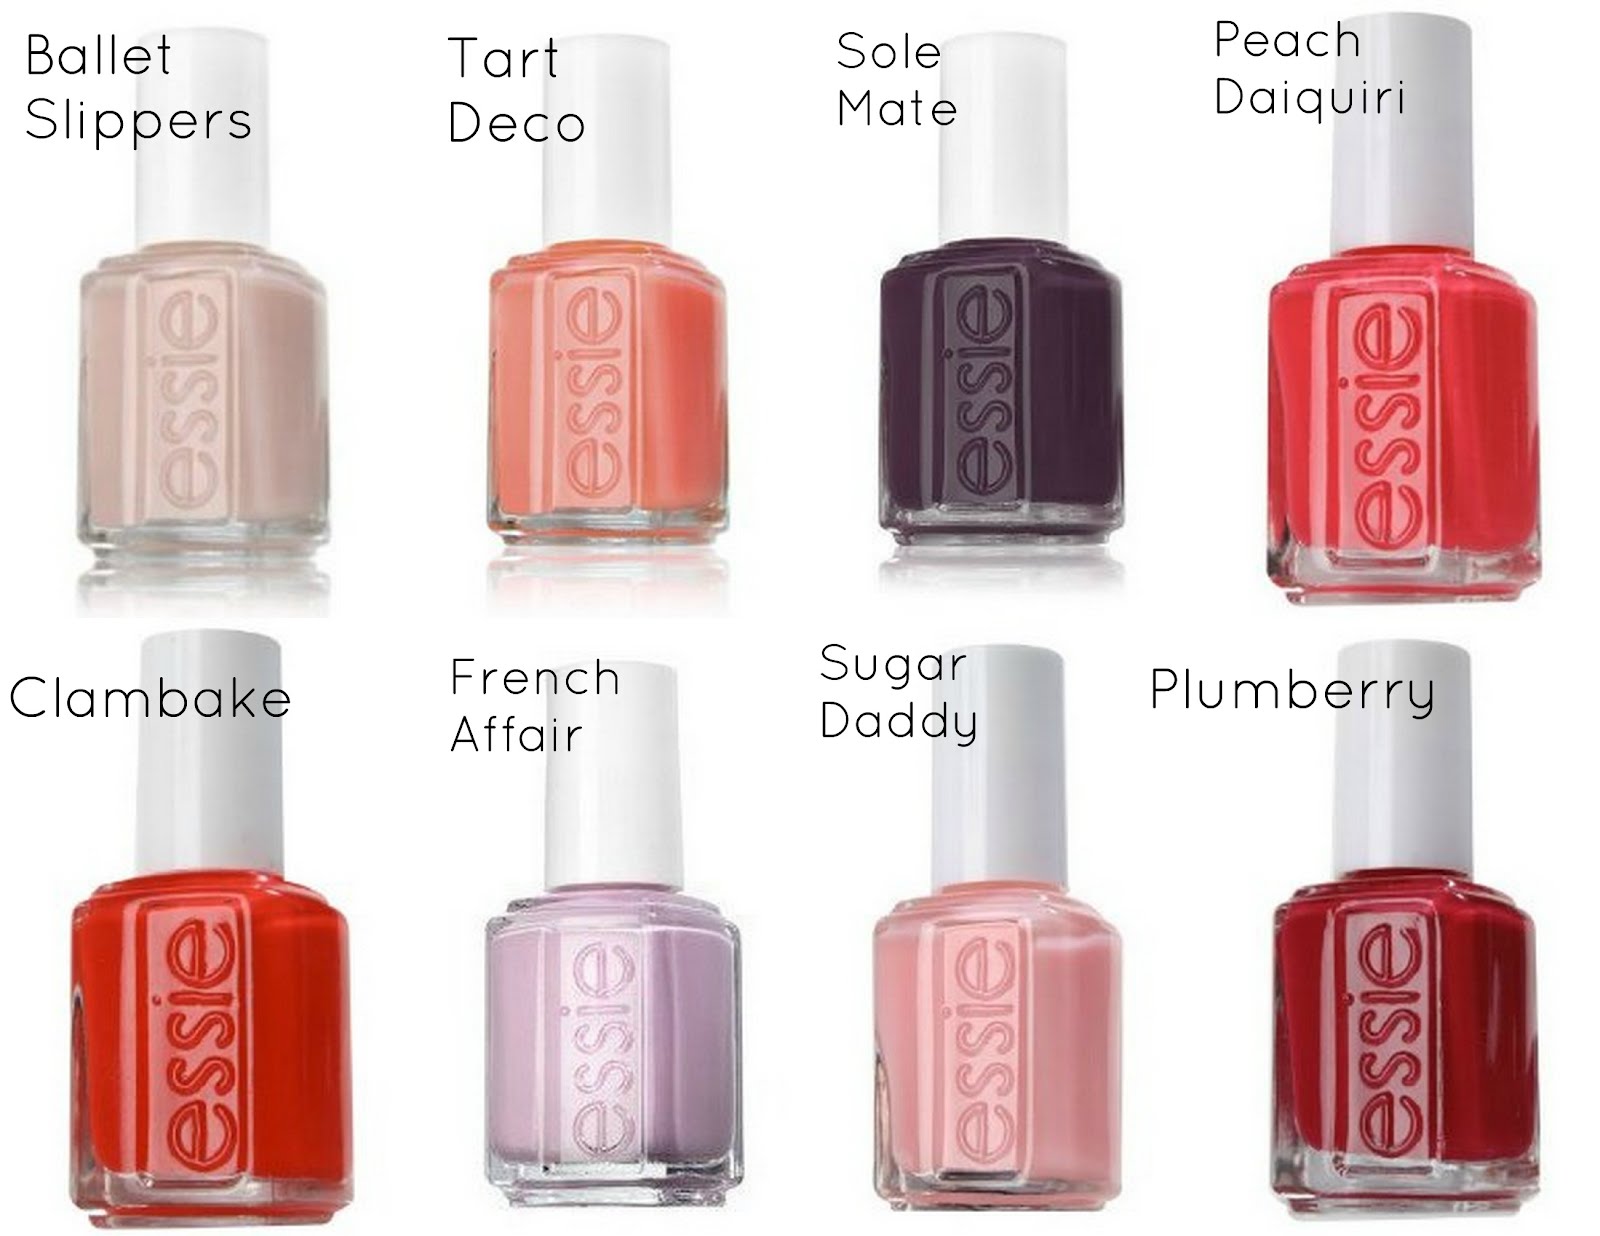 5. The Best Essie Nail Polish Colors for Summer - wide 8